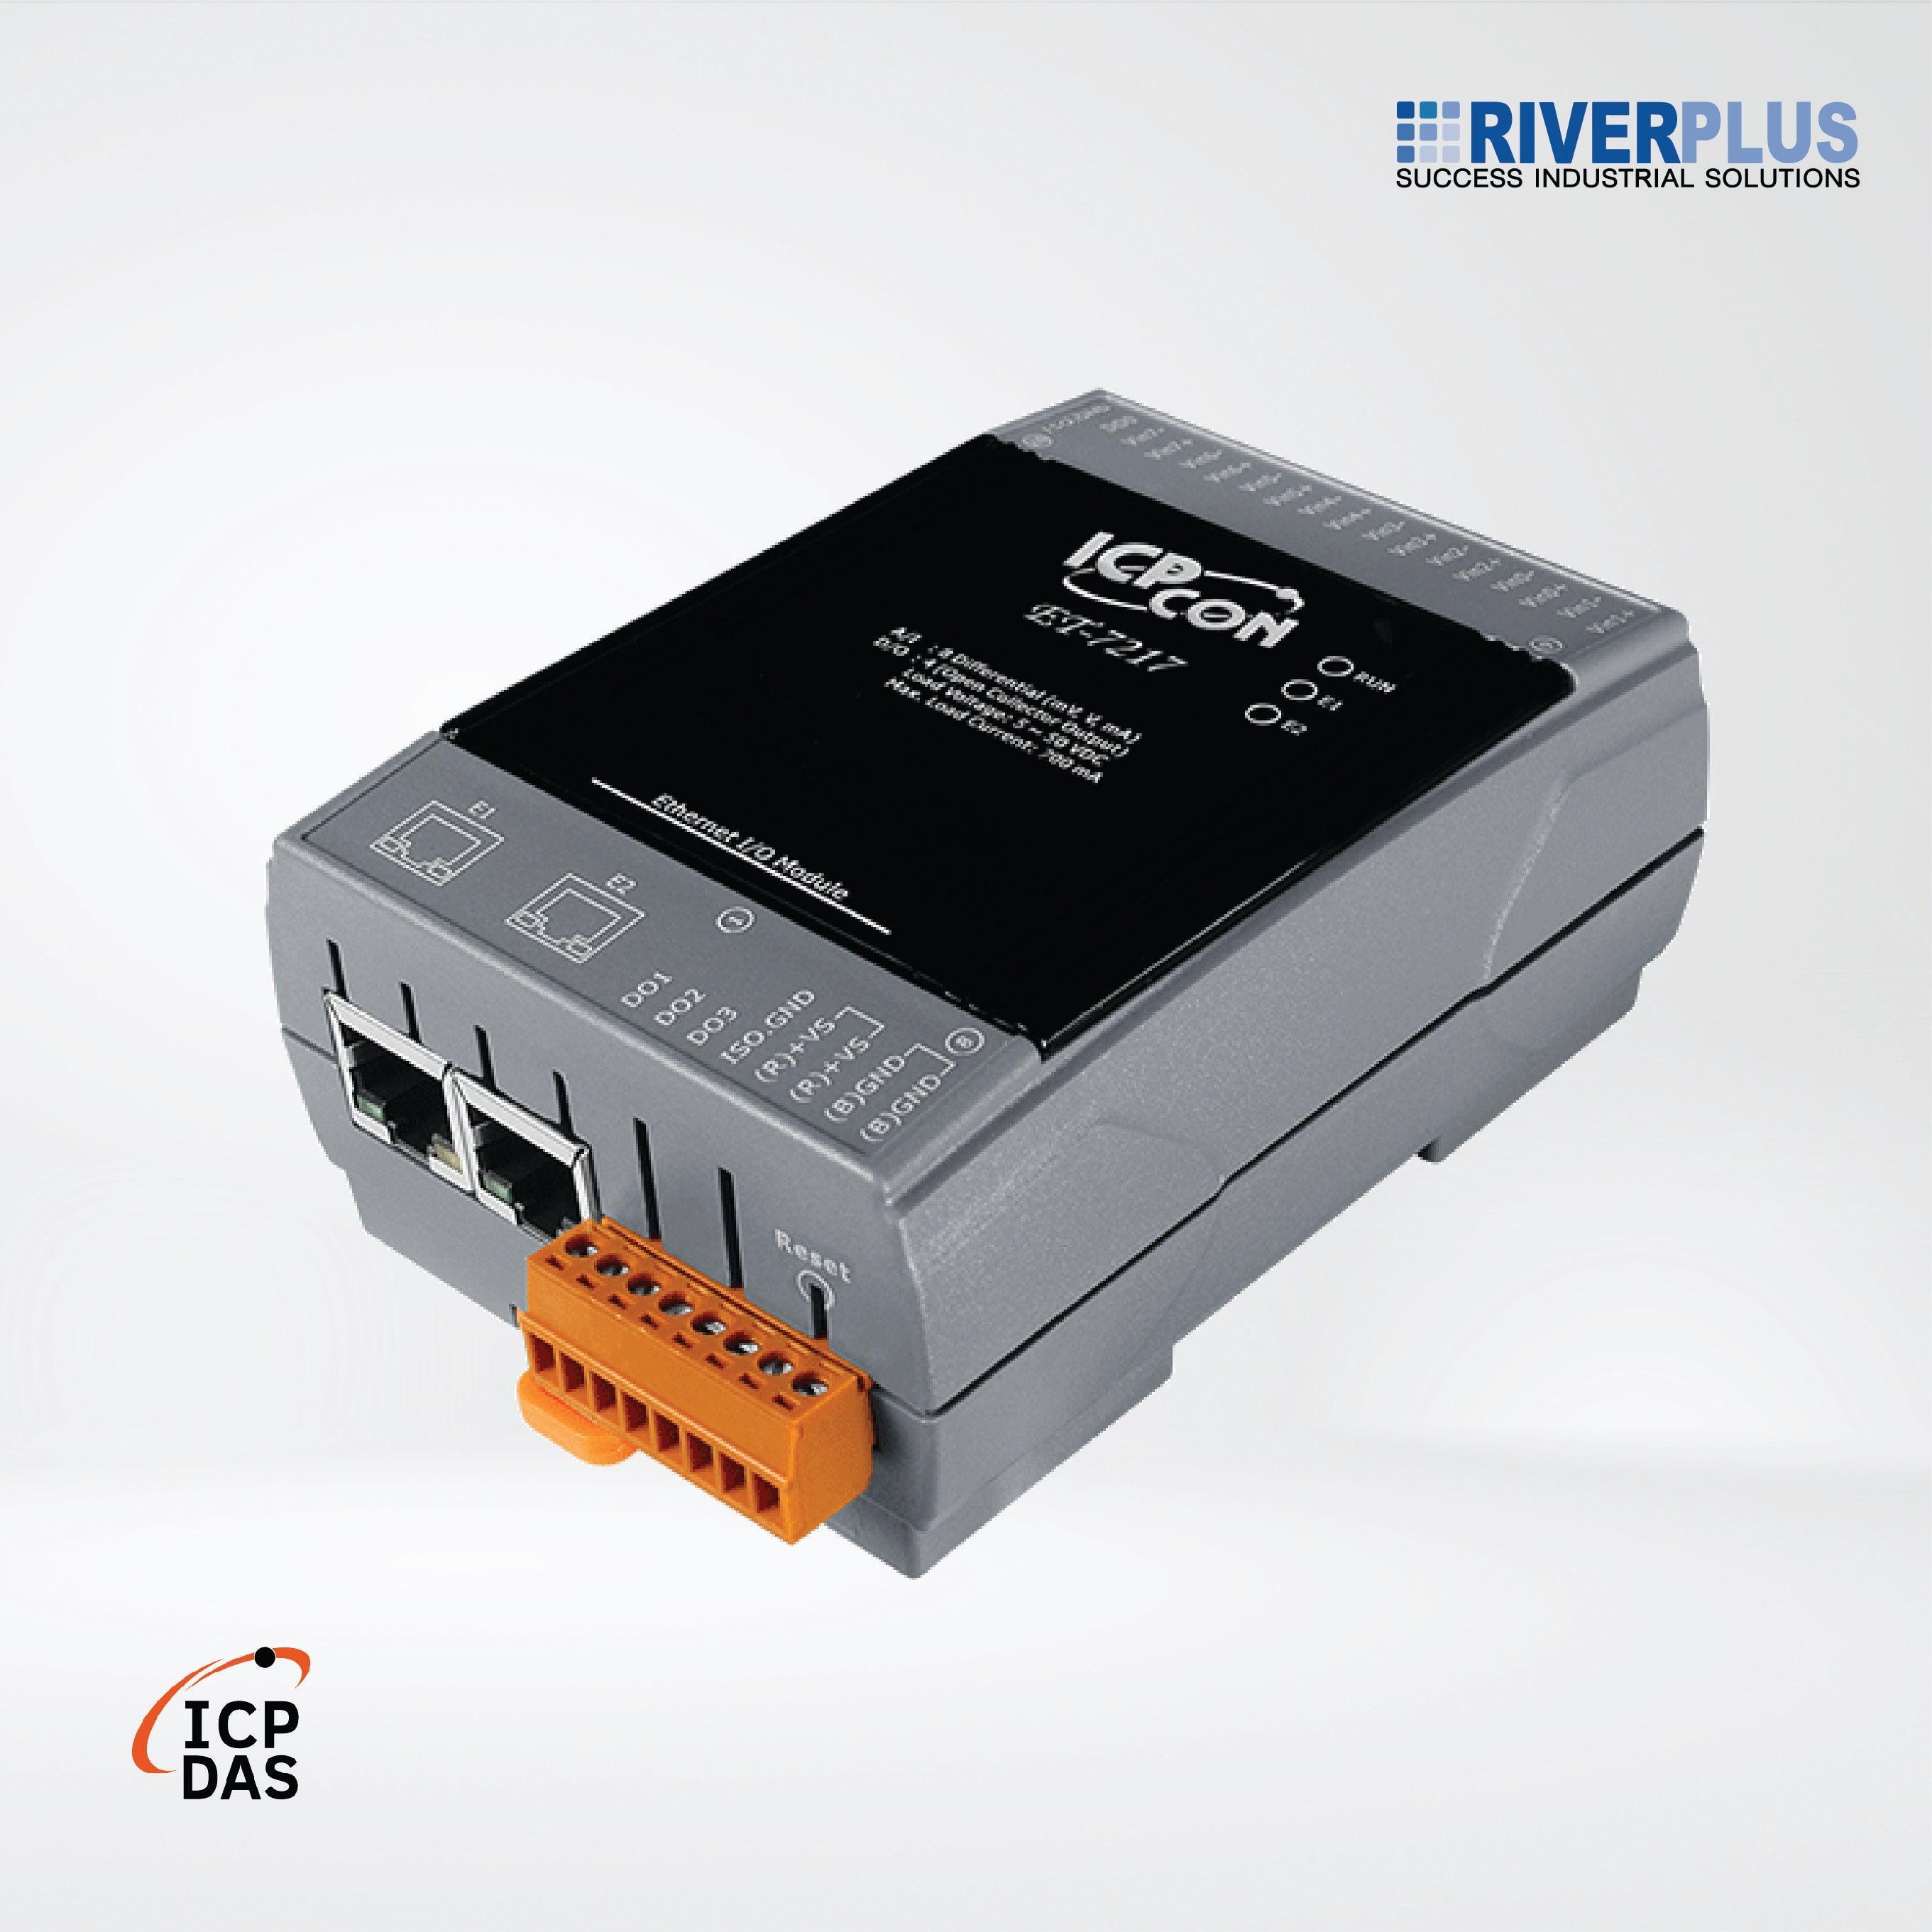 ET-7217 Ethernet I/O Module 2-port Ethernet Switch, 8-ch AI and 4-ch DO - Riverplus